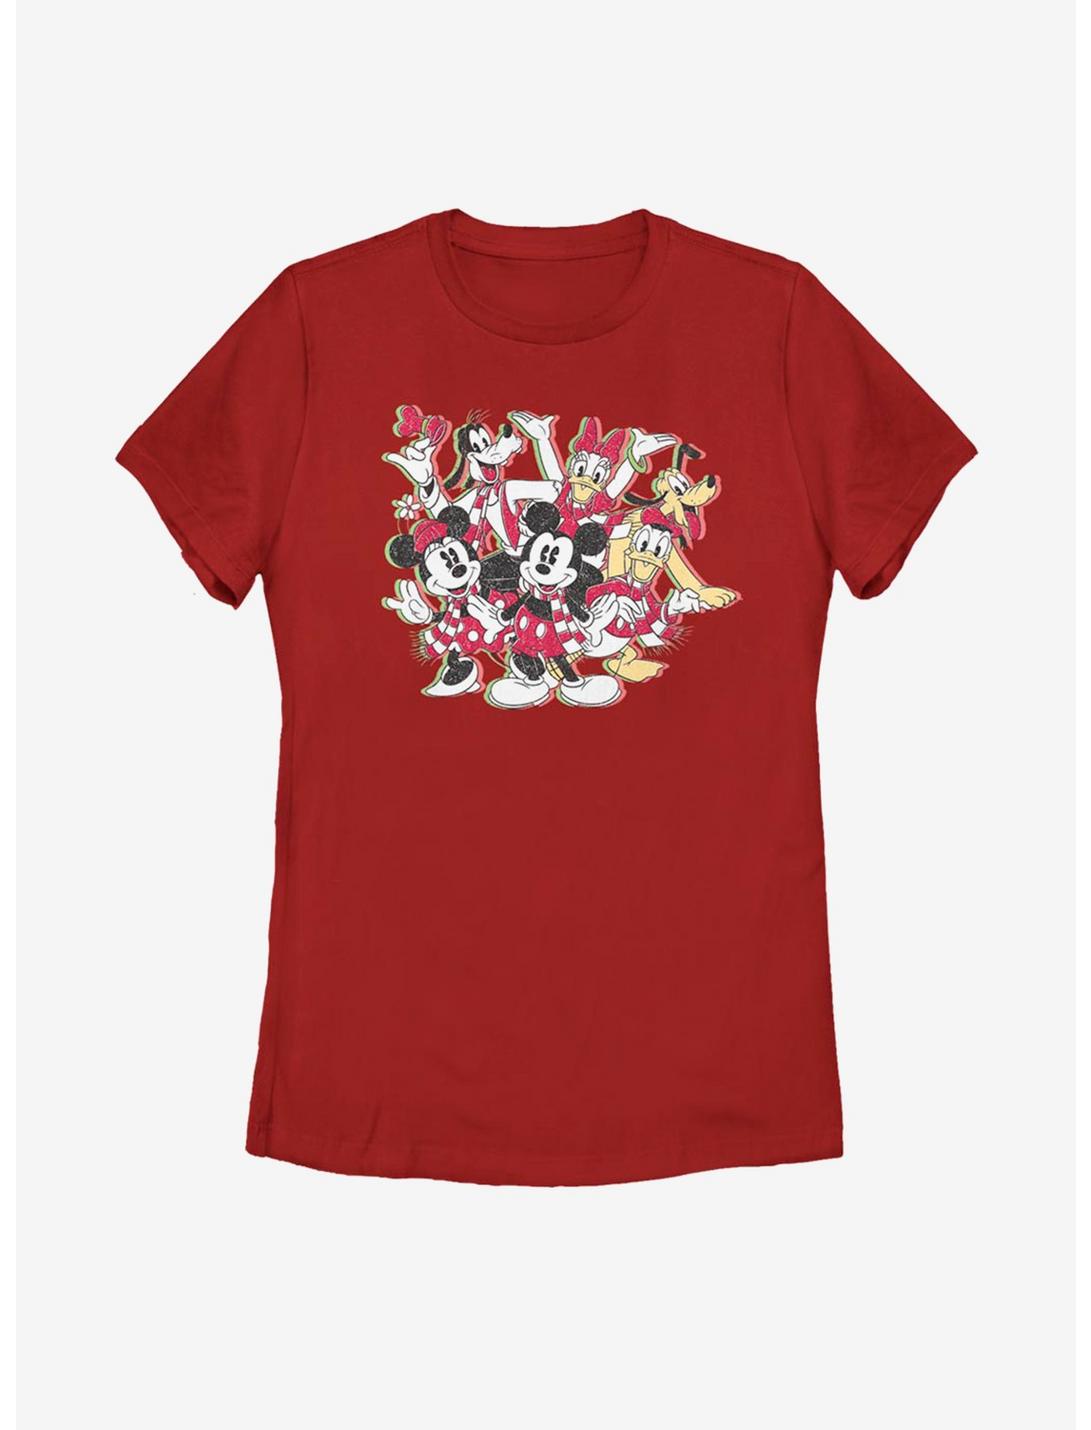 Disney Mickey Mouse Sensational Holiday Womens T-Shirt, RED, hi-res